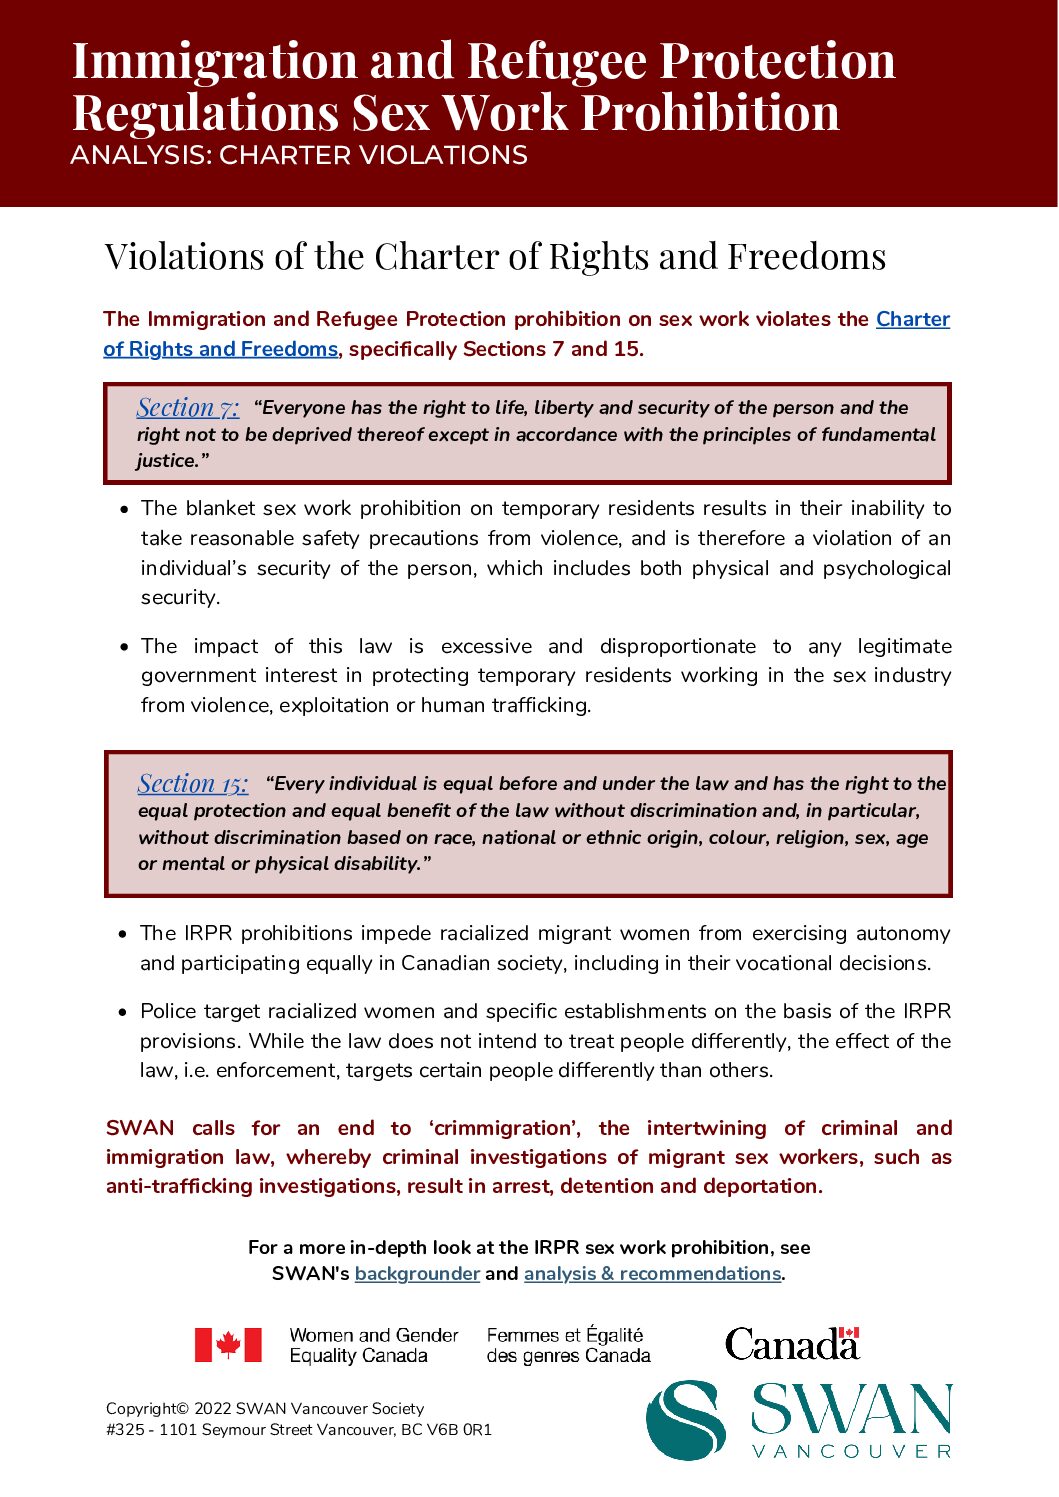 Immigration and Refugee Protection Regulations Sex Work Prohibition Charter Violations